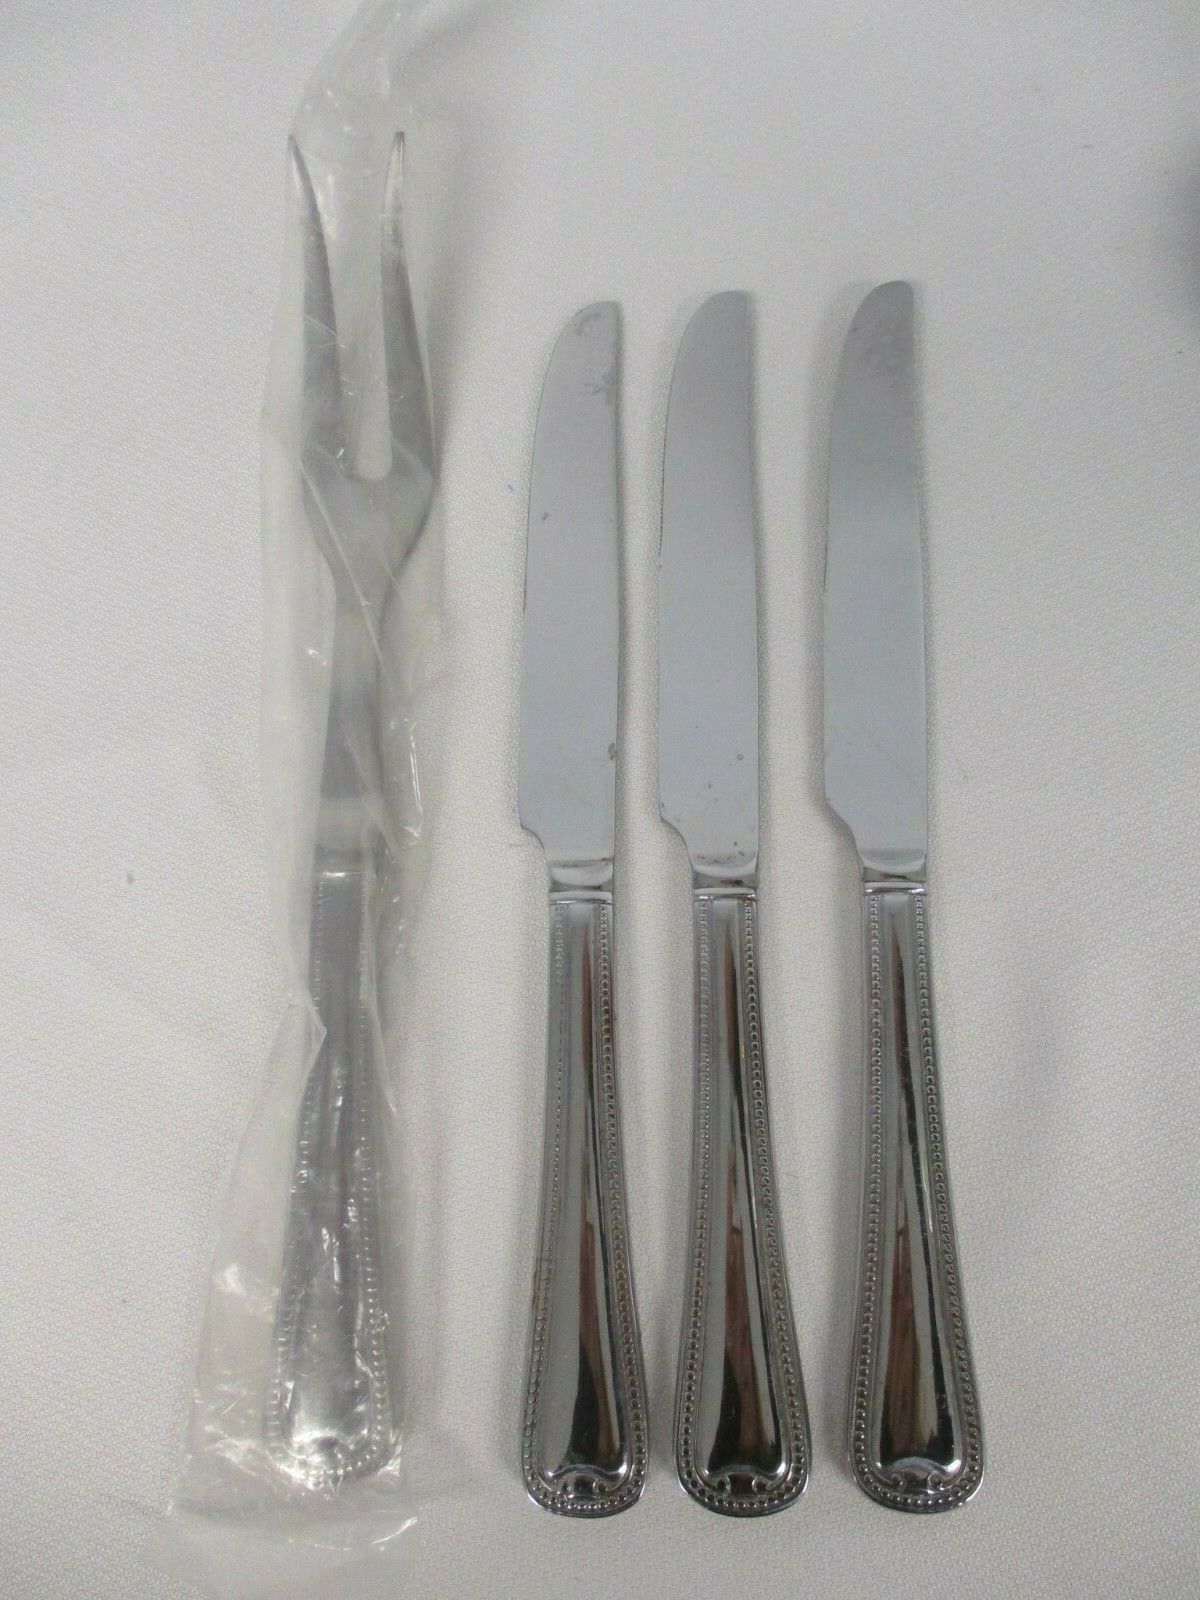 4 REED & BARTON STAINLESS GLOSSY BEADED RICHMOND CARVING FORK & DINNER KNIVES